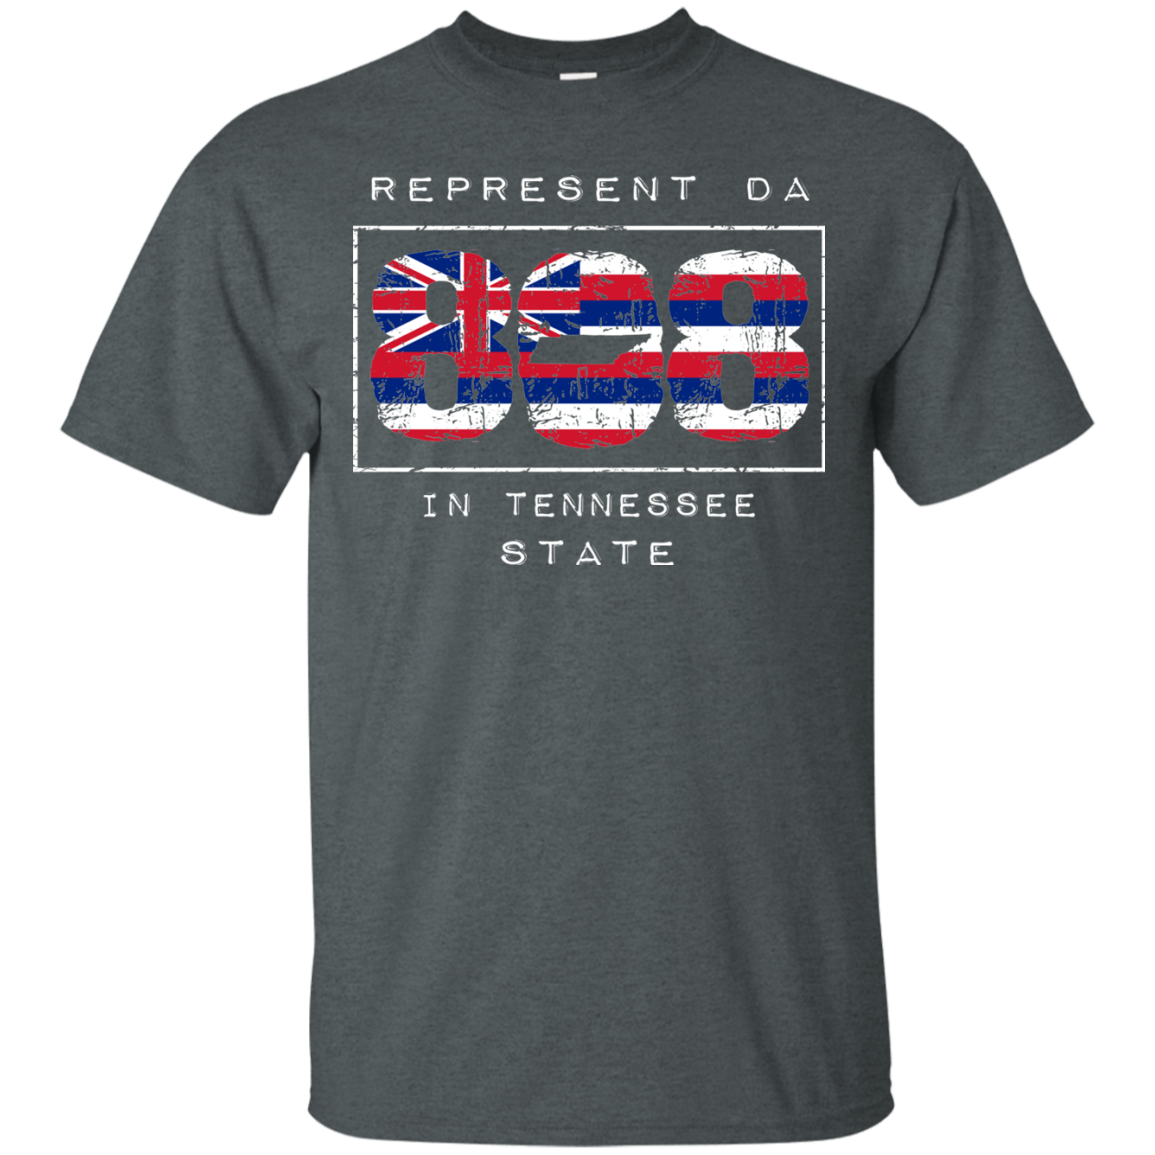 Rep Da 808 In Tennessee State Ultra Cotton T-Shirt, T-Shirts, Hawaii Nei All Day